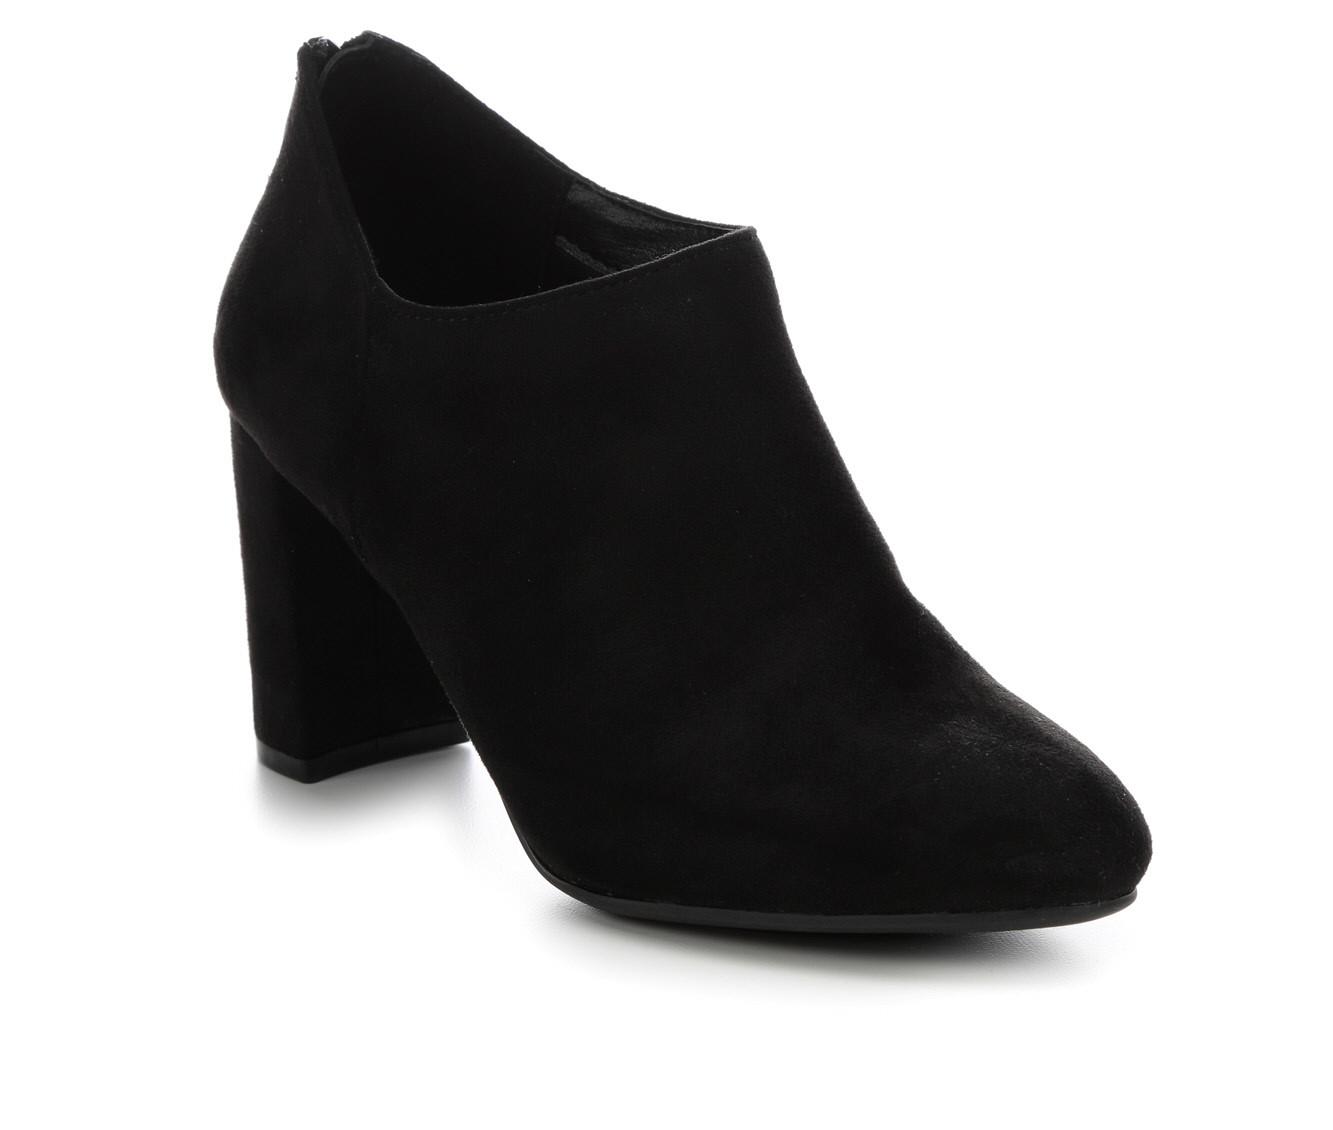 Women's CL By Laundry Logic Heeled Booties